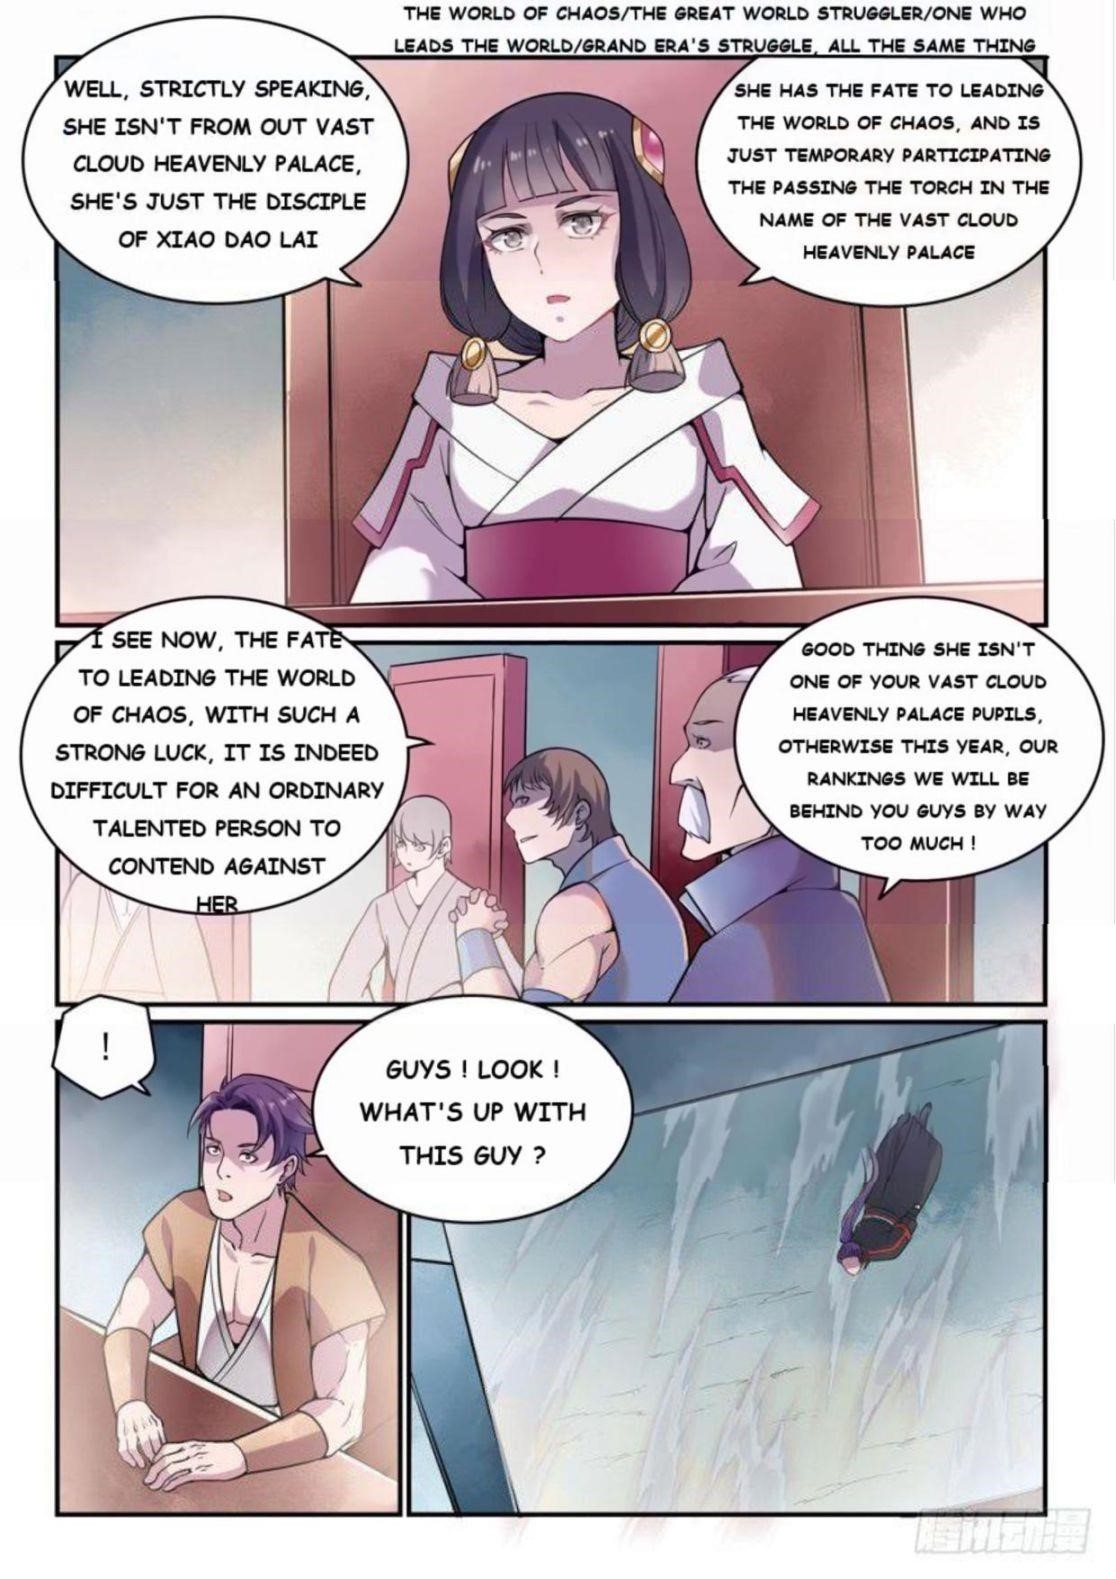 APOTHEOSIS Chapter 527 - Page 2